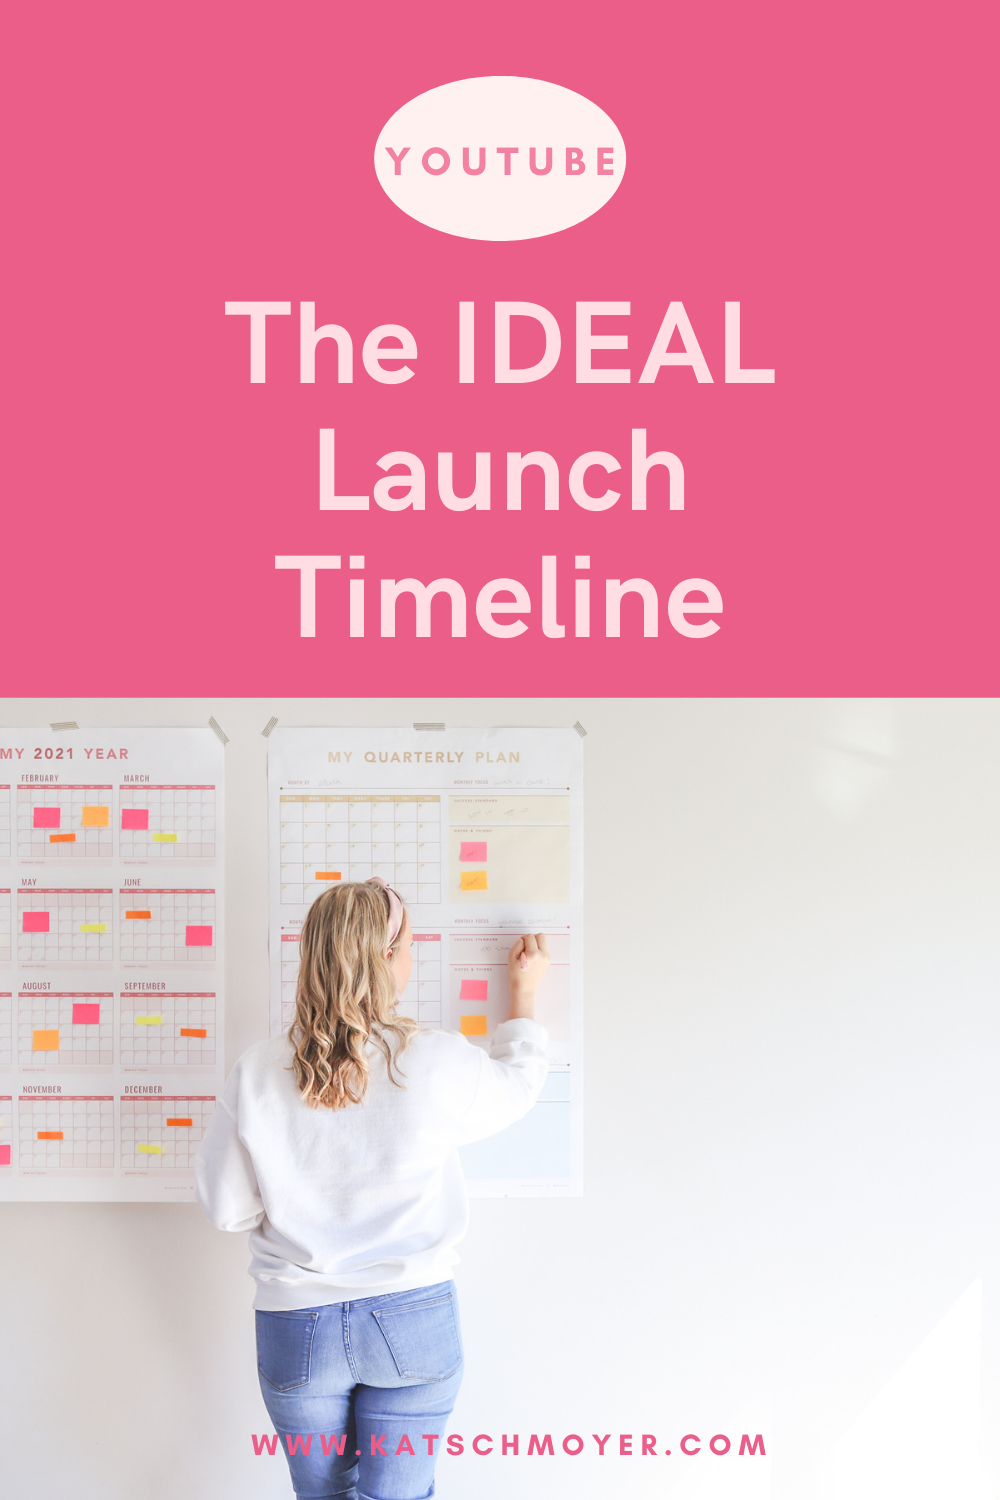 The Ideal Launch Timeline